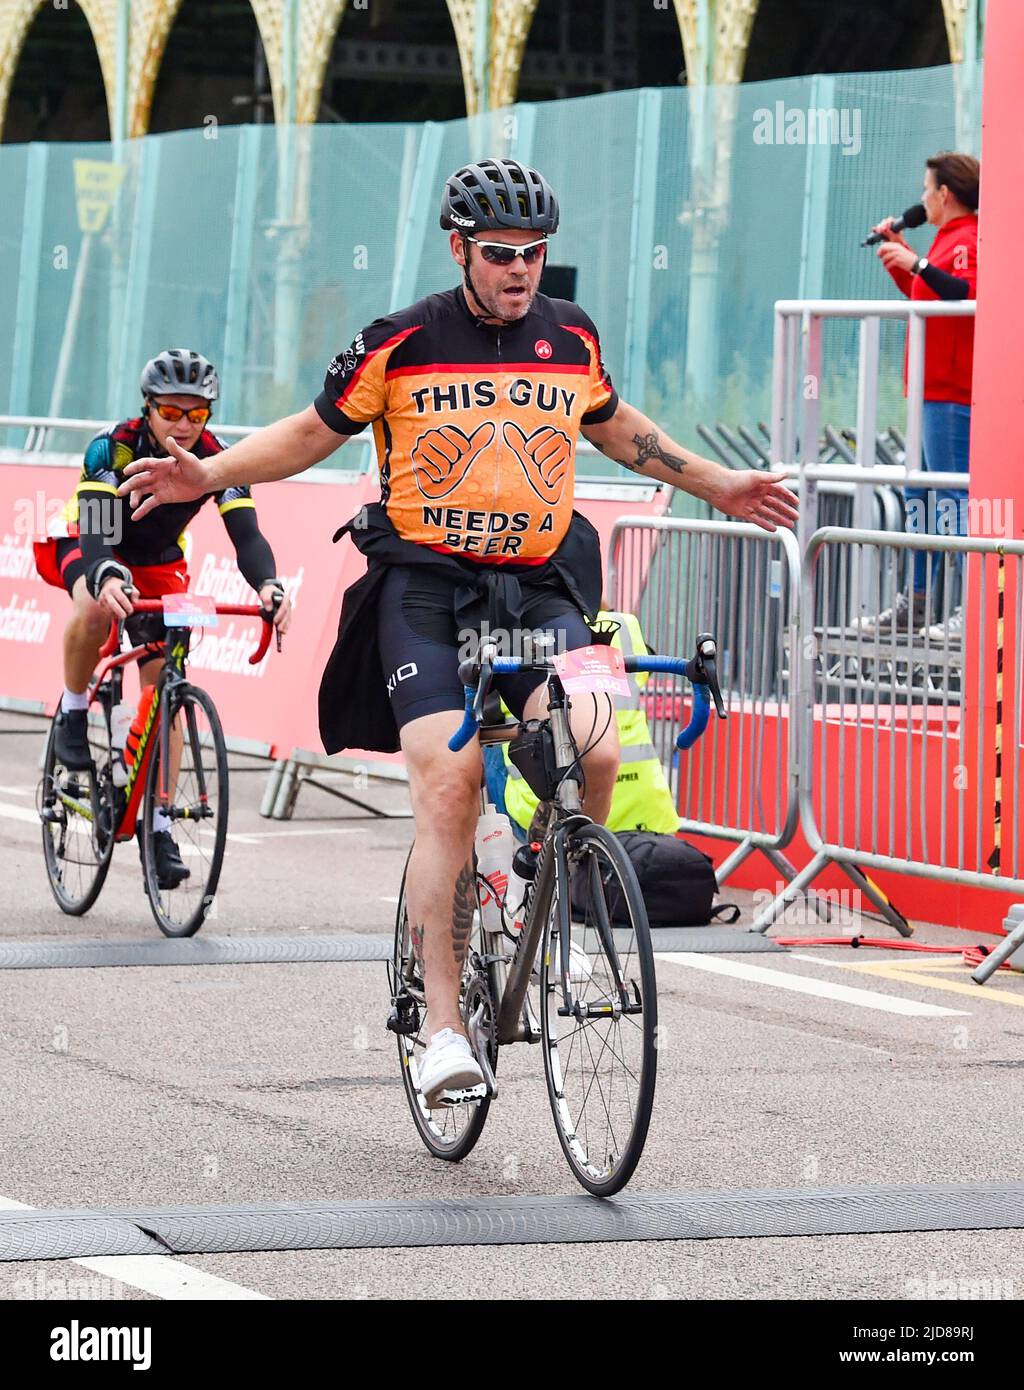 Brighton UK 19th June 2022 - Cyclists head over the finish line after taking part in the London to Brighton Bike Ride in aid of the British Heart Foundation on a much cooler day than it has been recently : Credit Simon Dack / Alamy Live News Stock Photo